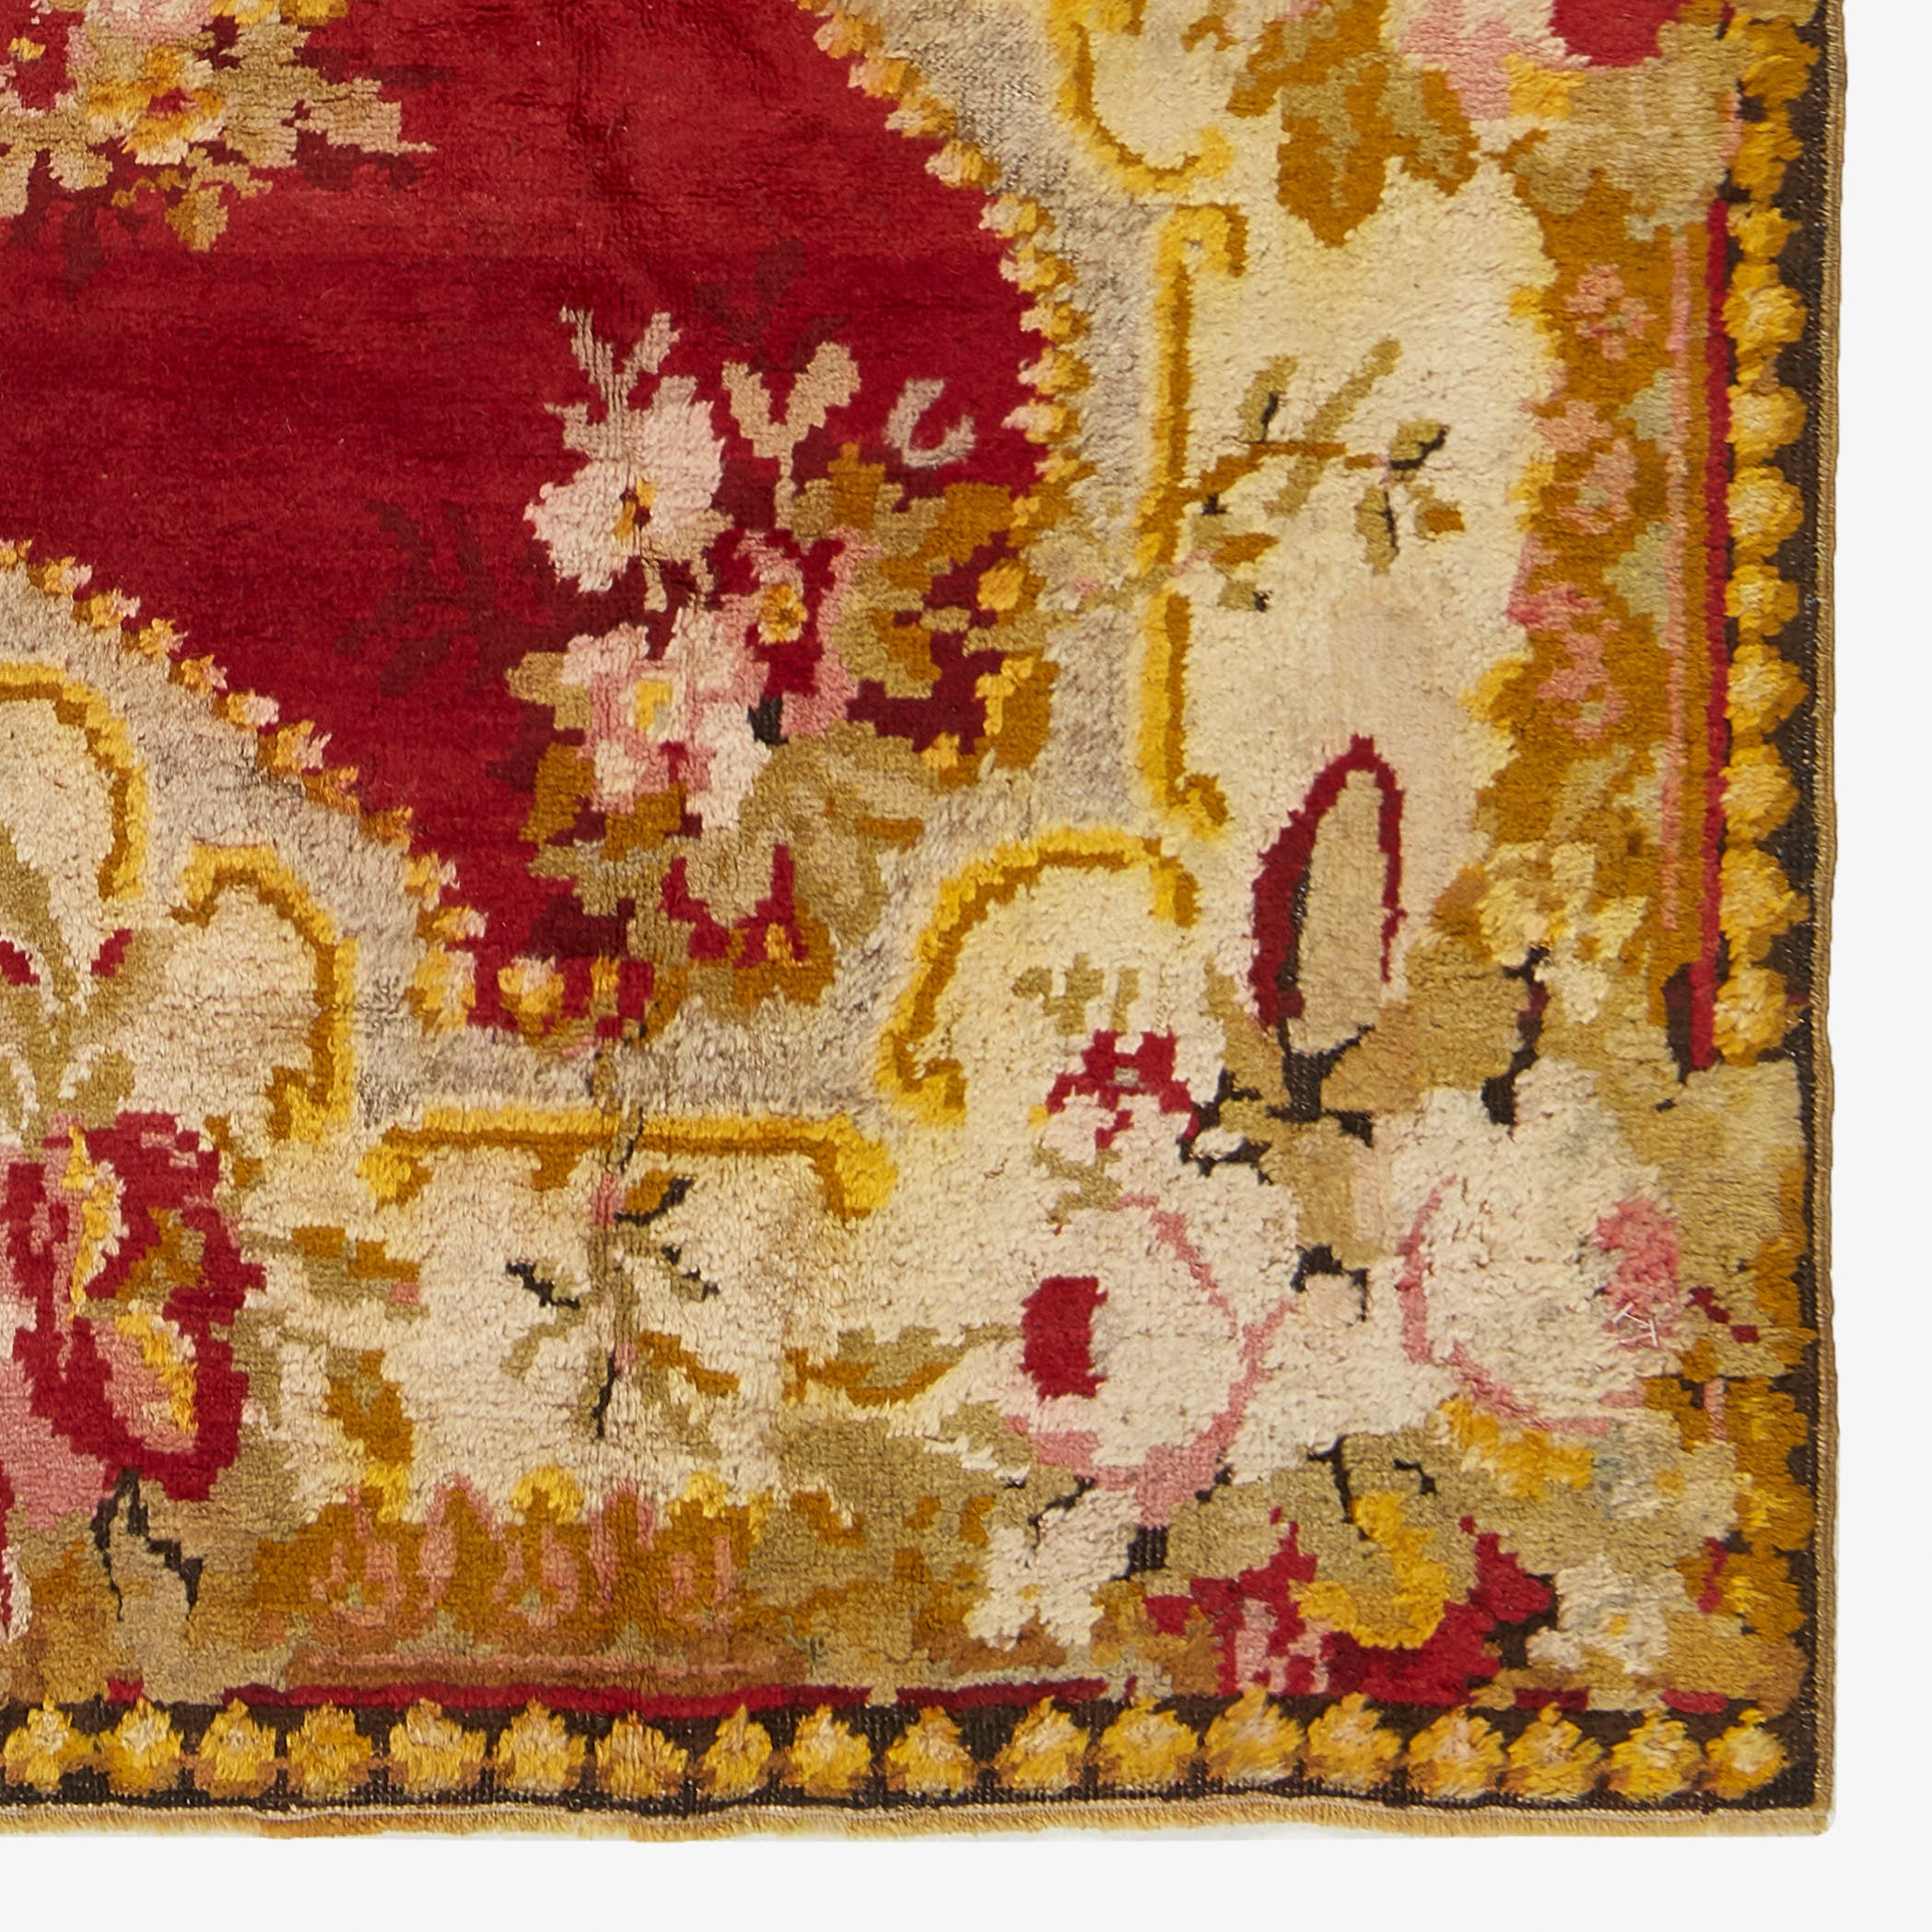 Close-up of an ornately patterned rug showcasing intricate floral motifs.